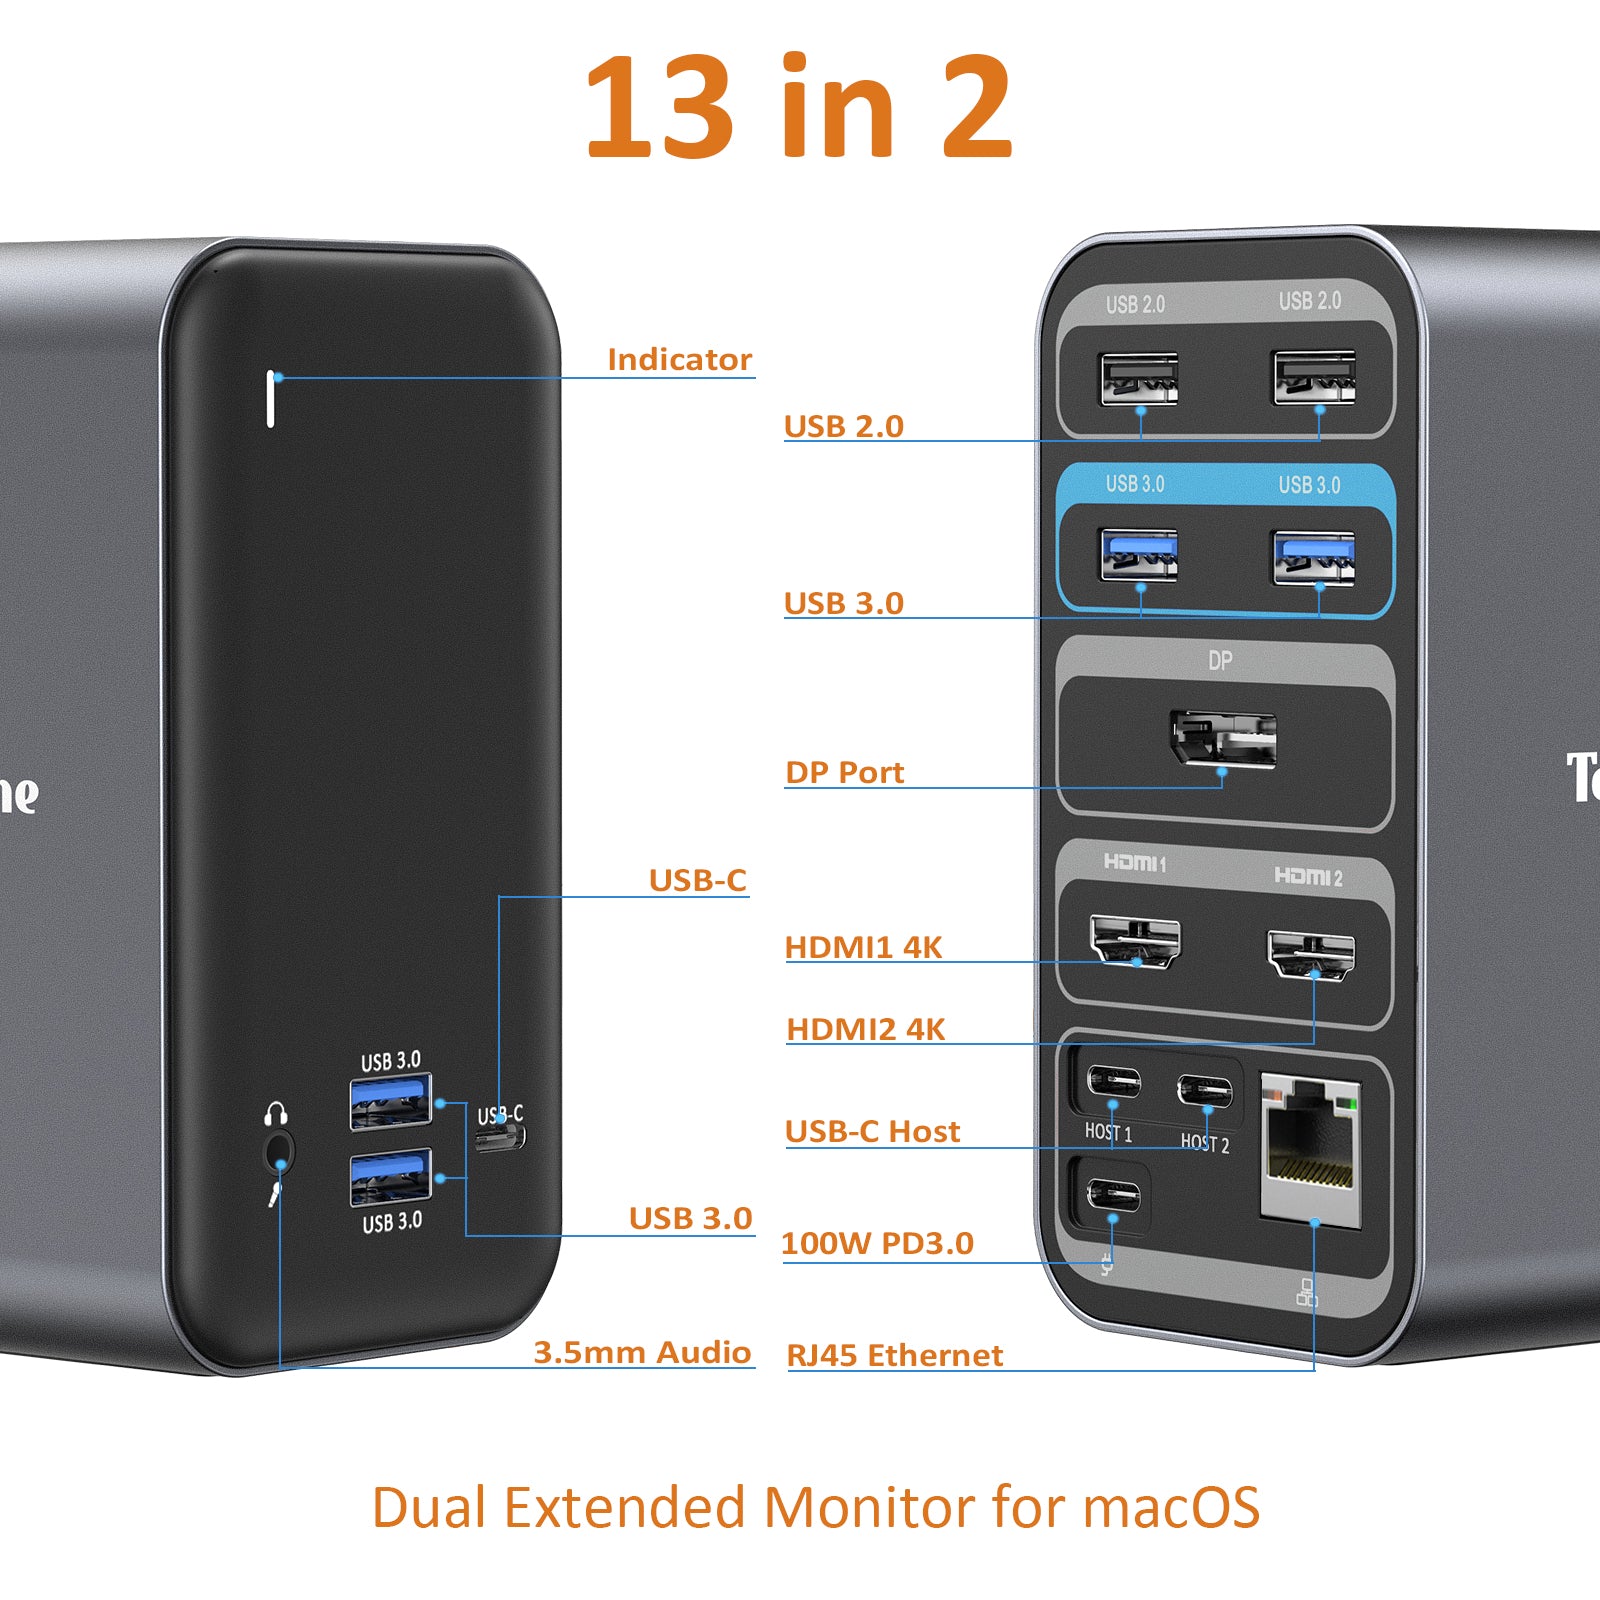 13-in-2 USB C Docking Station Dual Extened Monitor for macOS